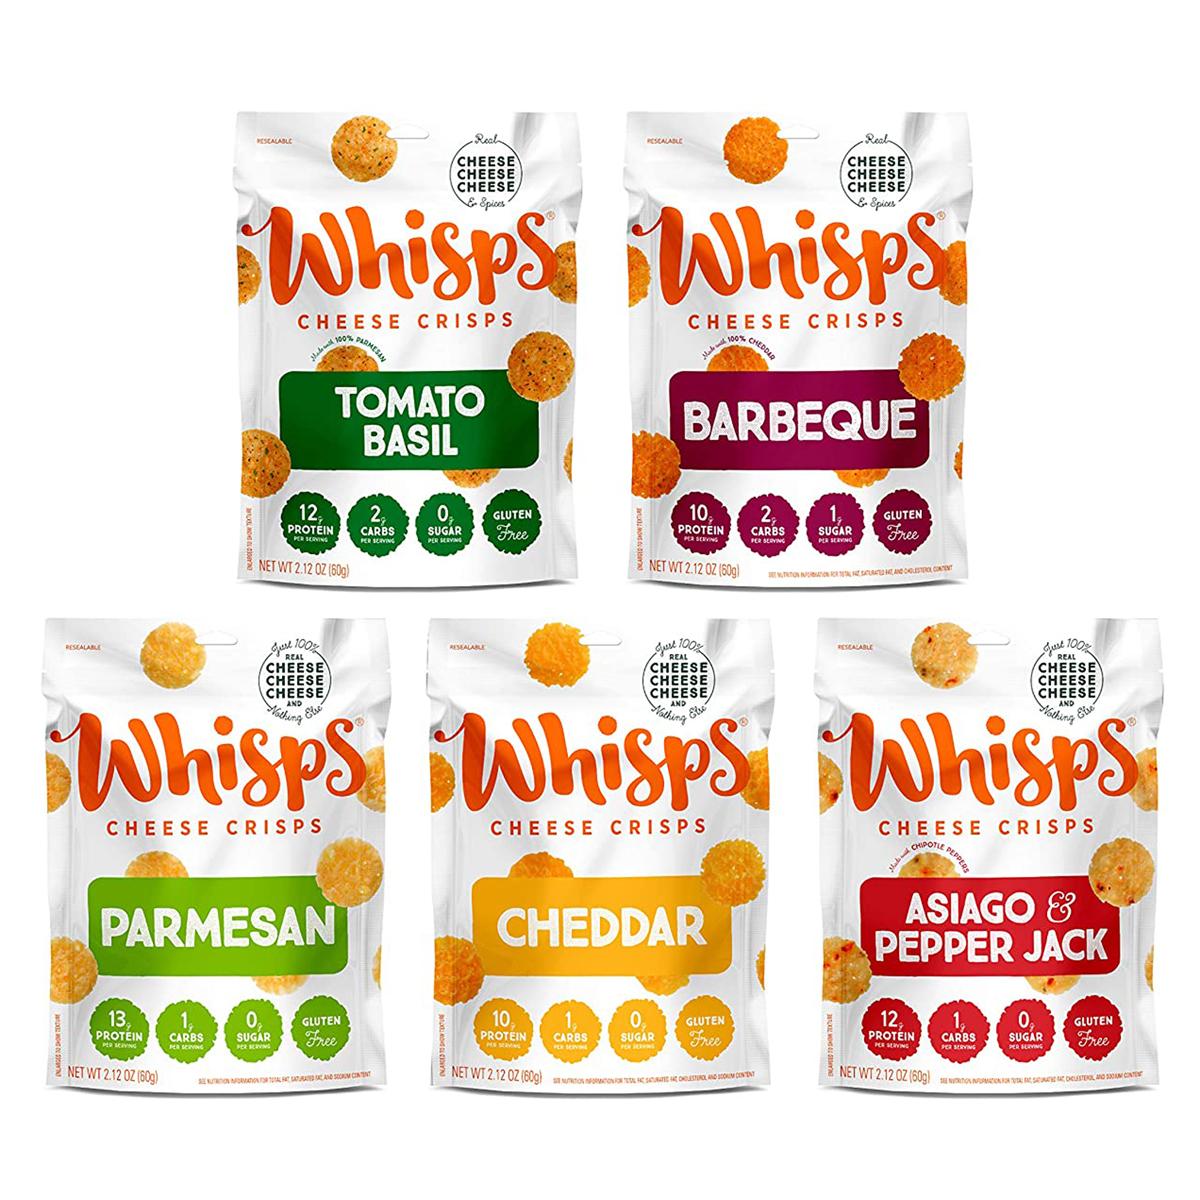 Whisps Cheese Crisps 5-Flavor Variety Pack for $13.49 Shipped